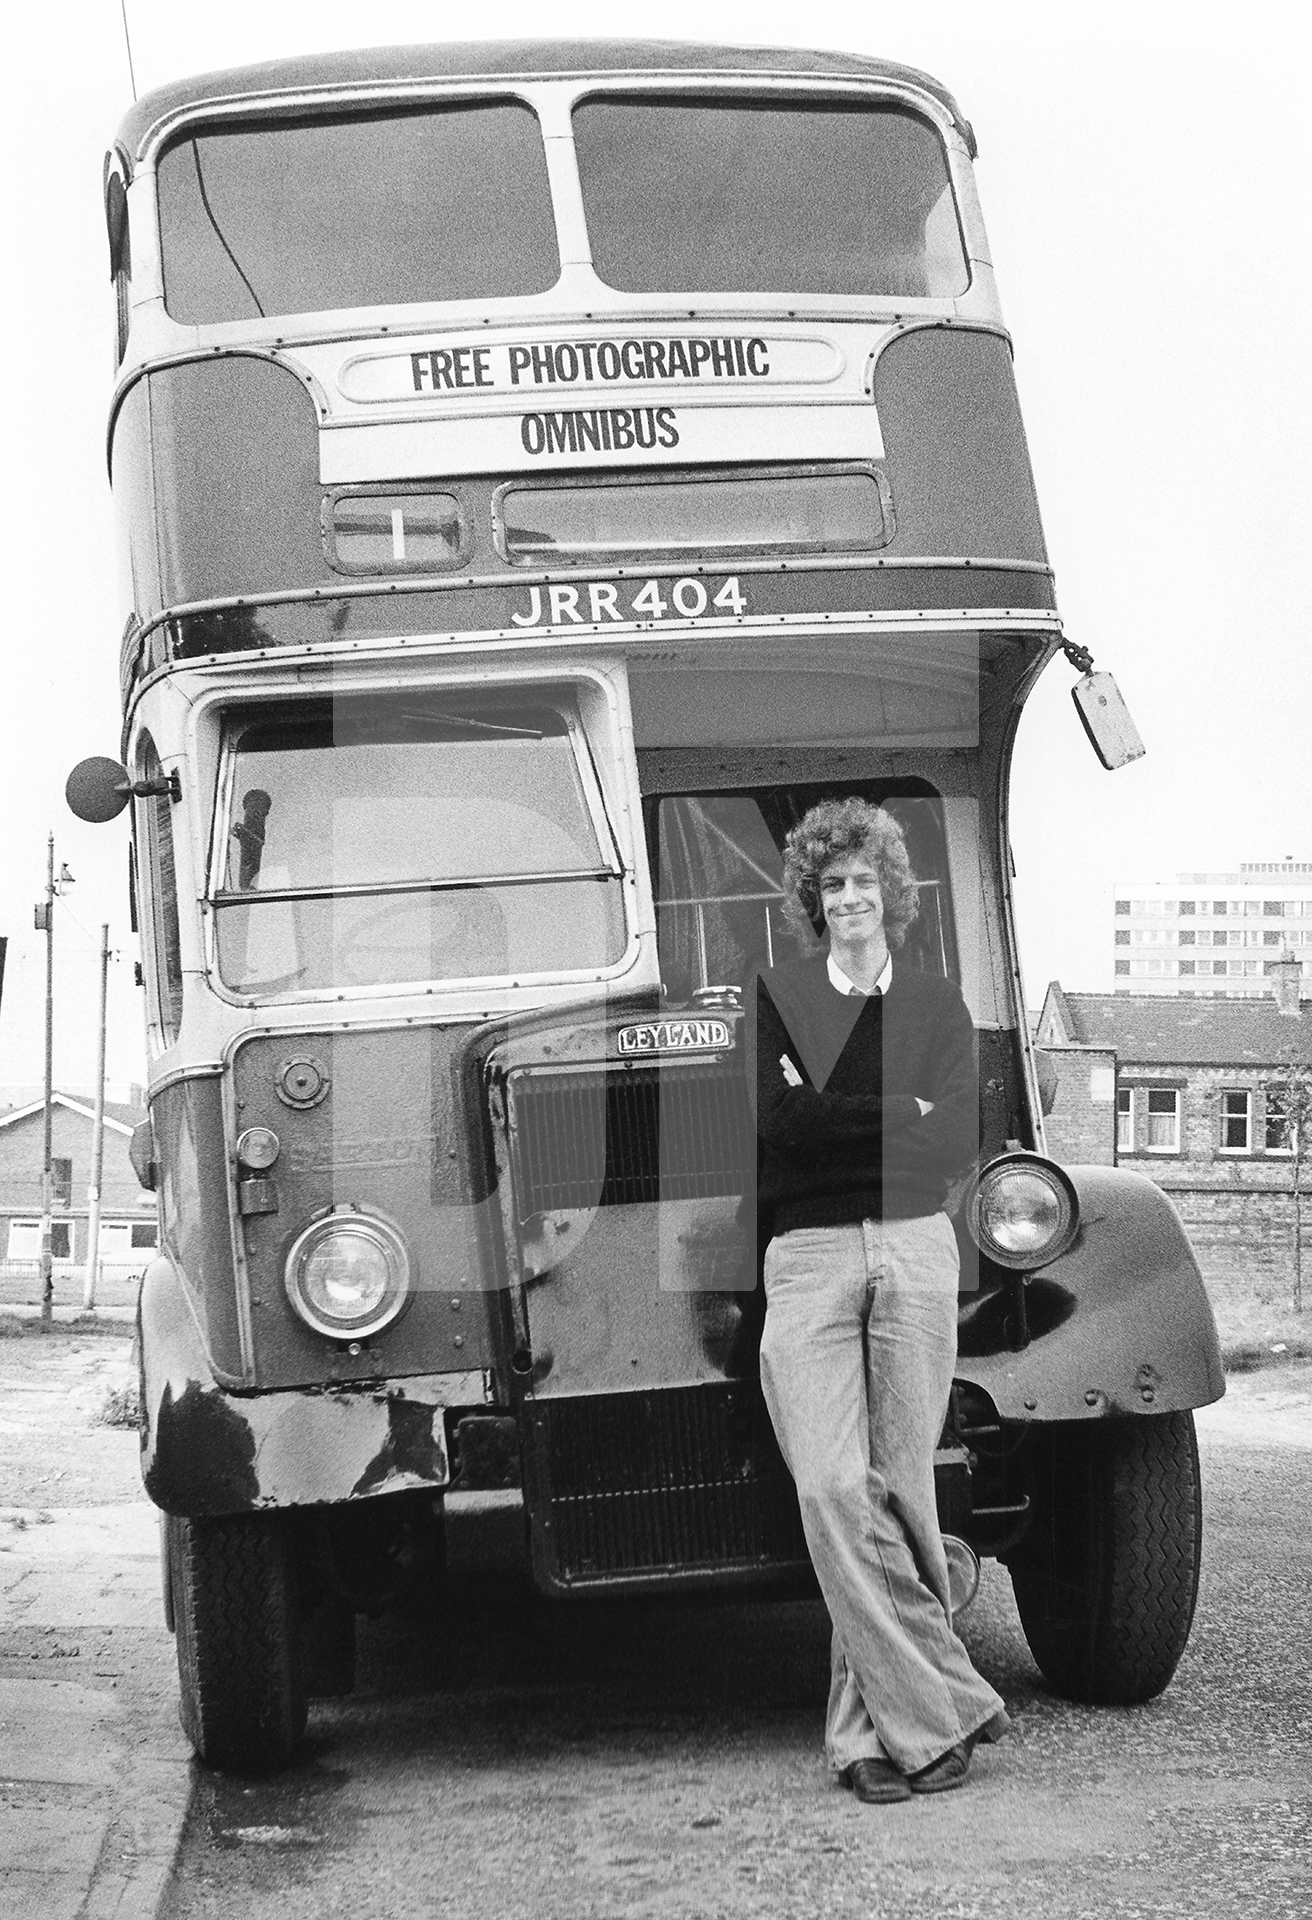 Daniel Meadows and the Free Photographic Omnibus, 1973 by Daniel Meadows